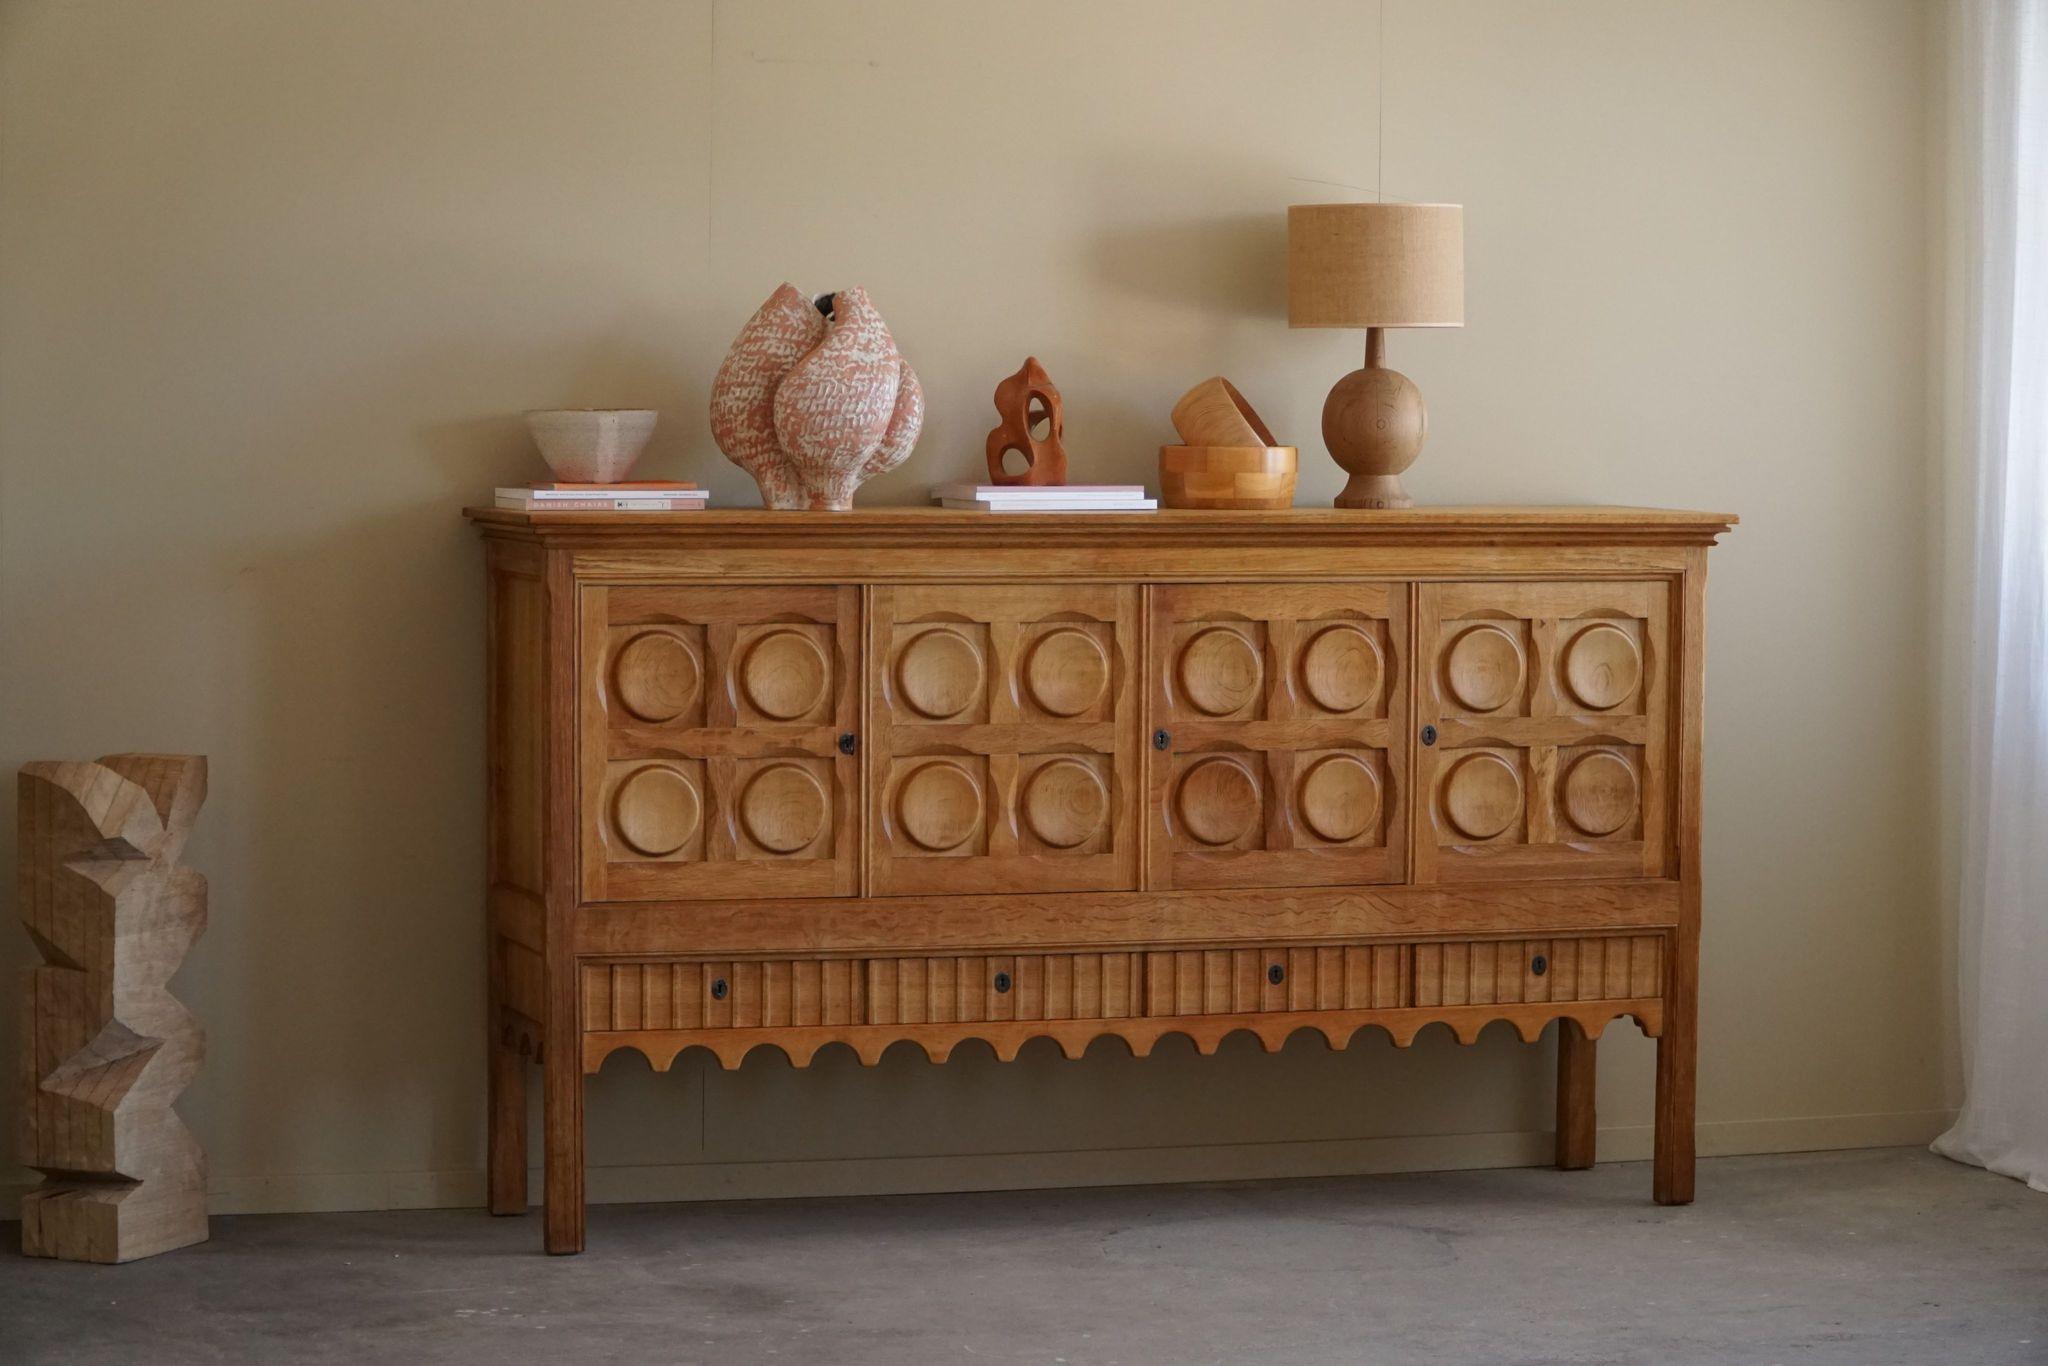 A classic rectangular sideboard / cabinet in oak with plenty of storage and a nice carved front design. Designed by Henning (Henry) Kjærnulf for Nyrup Møbelfabrik in the 1960s. Crafted from oak, the sideboard features a robust and imposing presence,